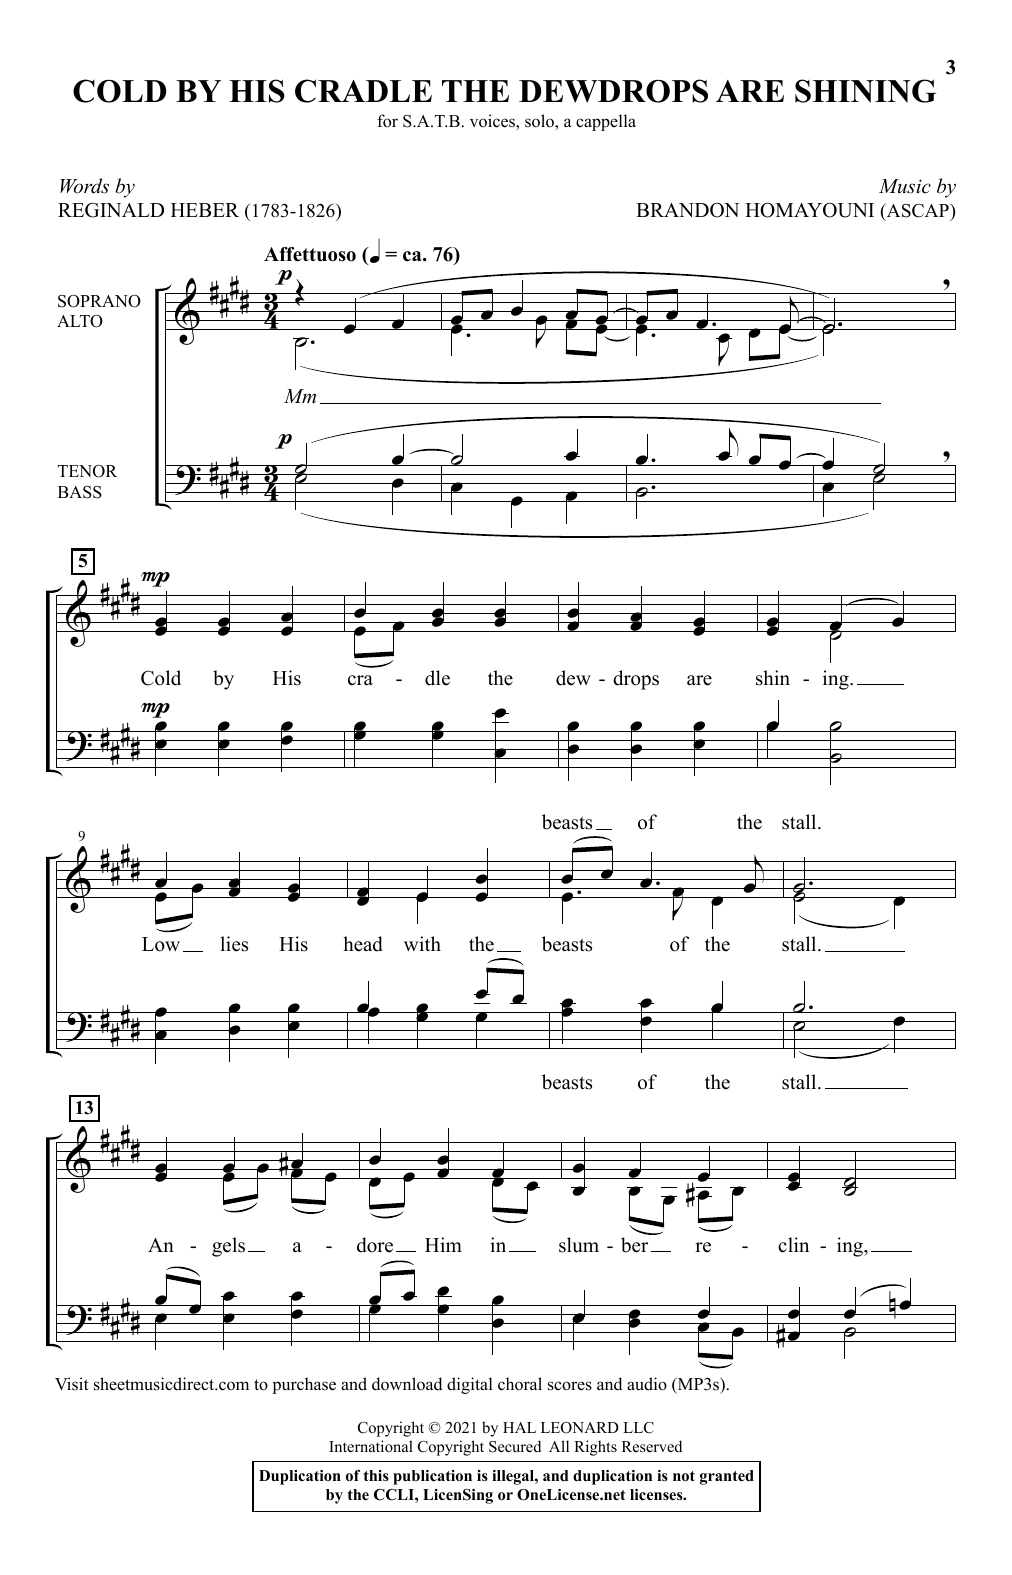 Download Reginald Heber and Brandon Homayouni Cold By His Cradle The Dewdrops Are Shi Sheet Music